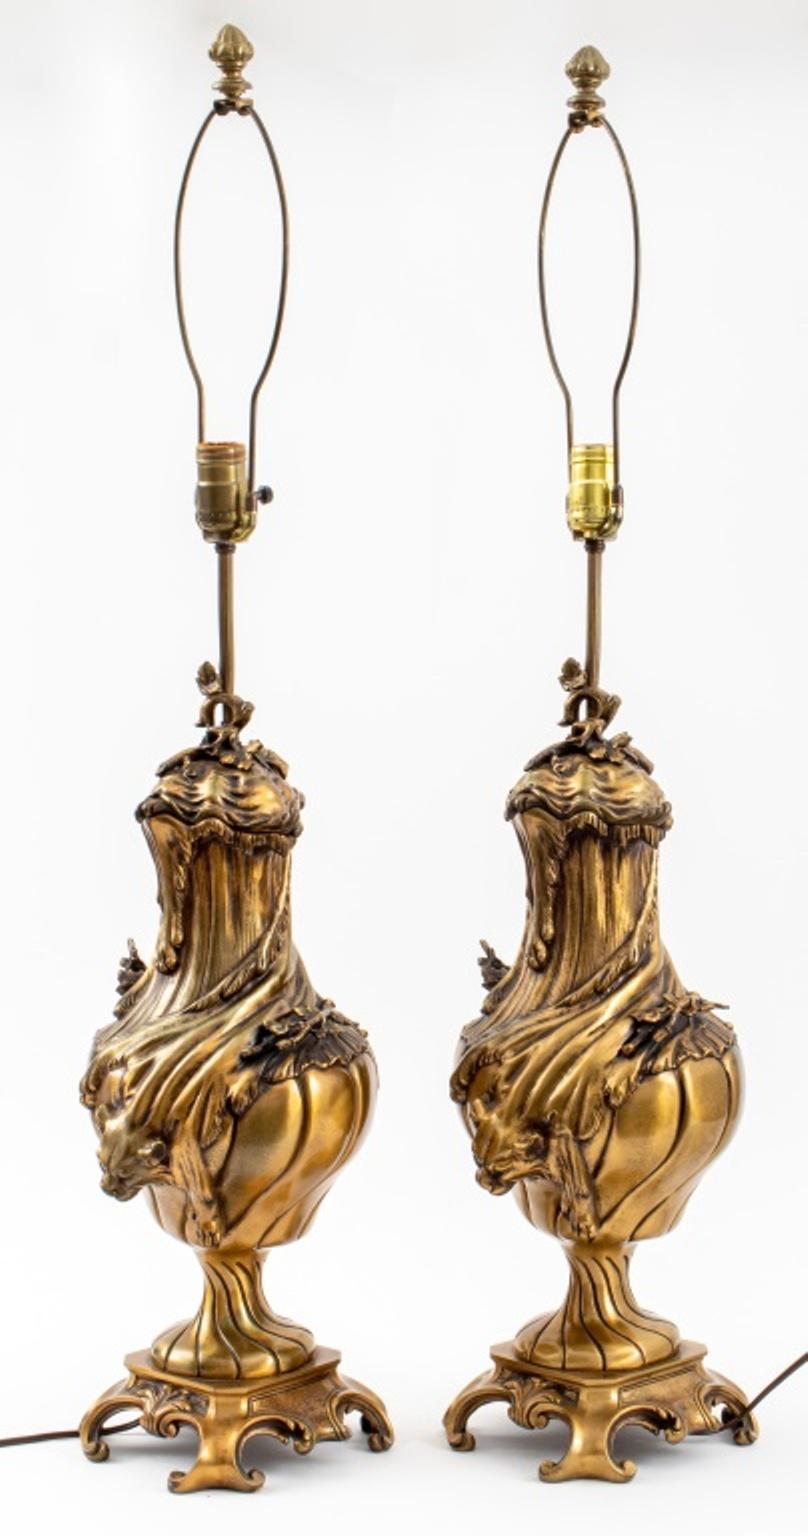 Italian Baroque Revival Style Bronze Lamps, Pair In Good Condition For Sale In New York, NY